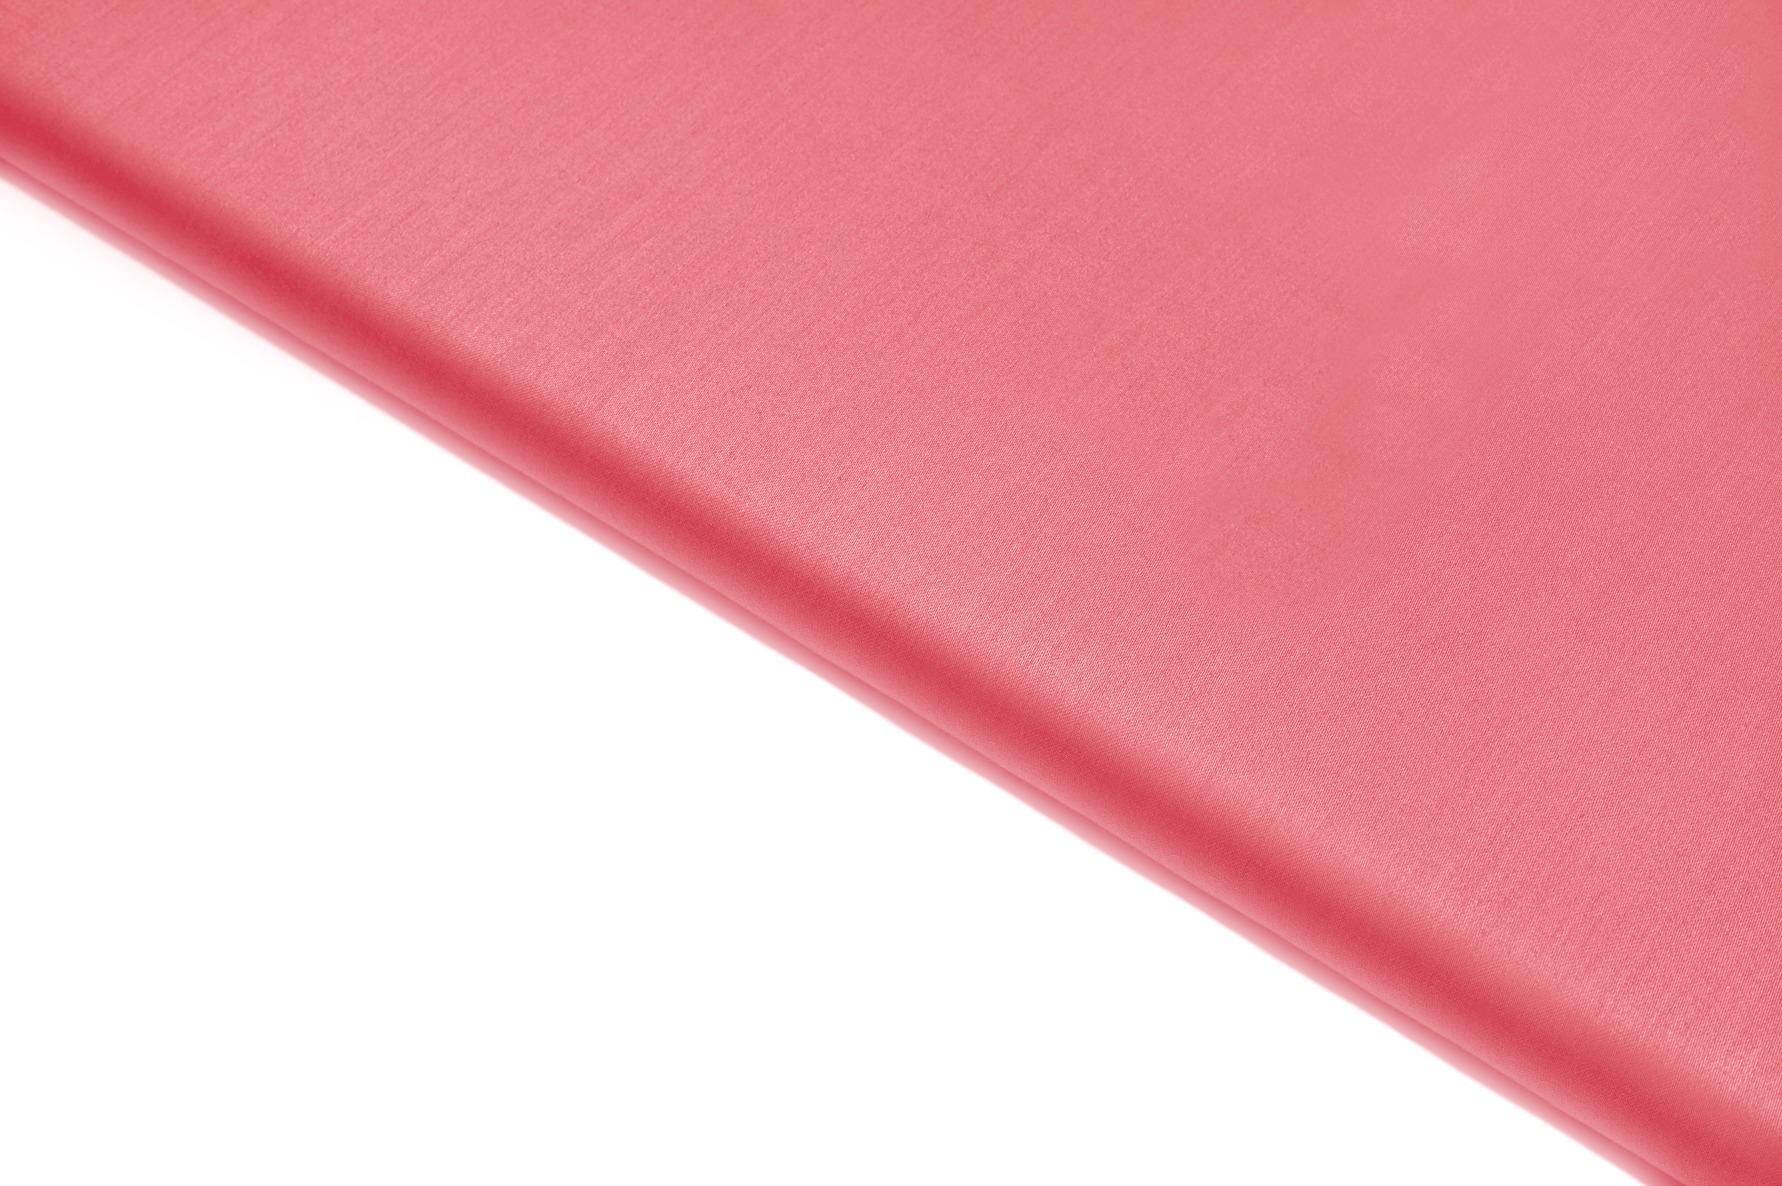 CORAL PINK COLOR GLOSSY FINISH COTTON SATIN PLAIN FABRIC 10499